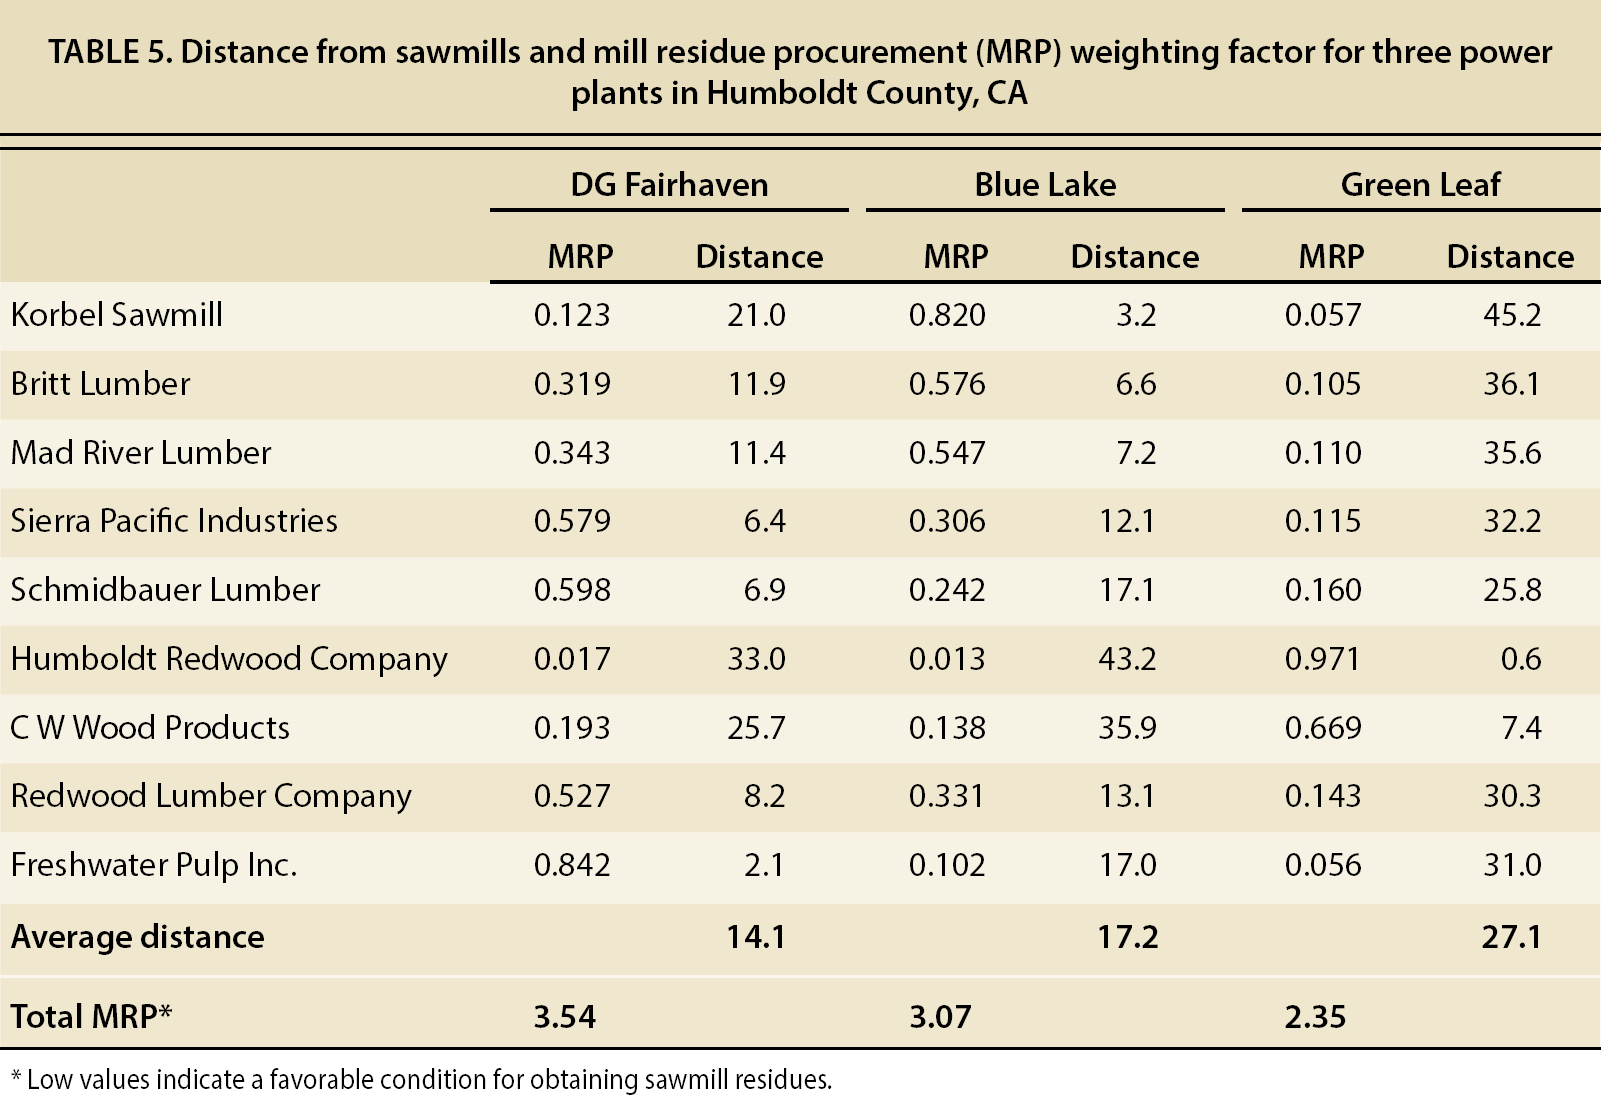 Distance from sawmills and mill residue procurement (MRP) weighting factor for three power plants in Humboldt County, CA